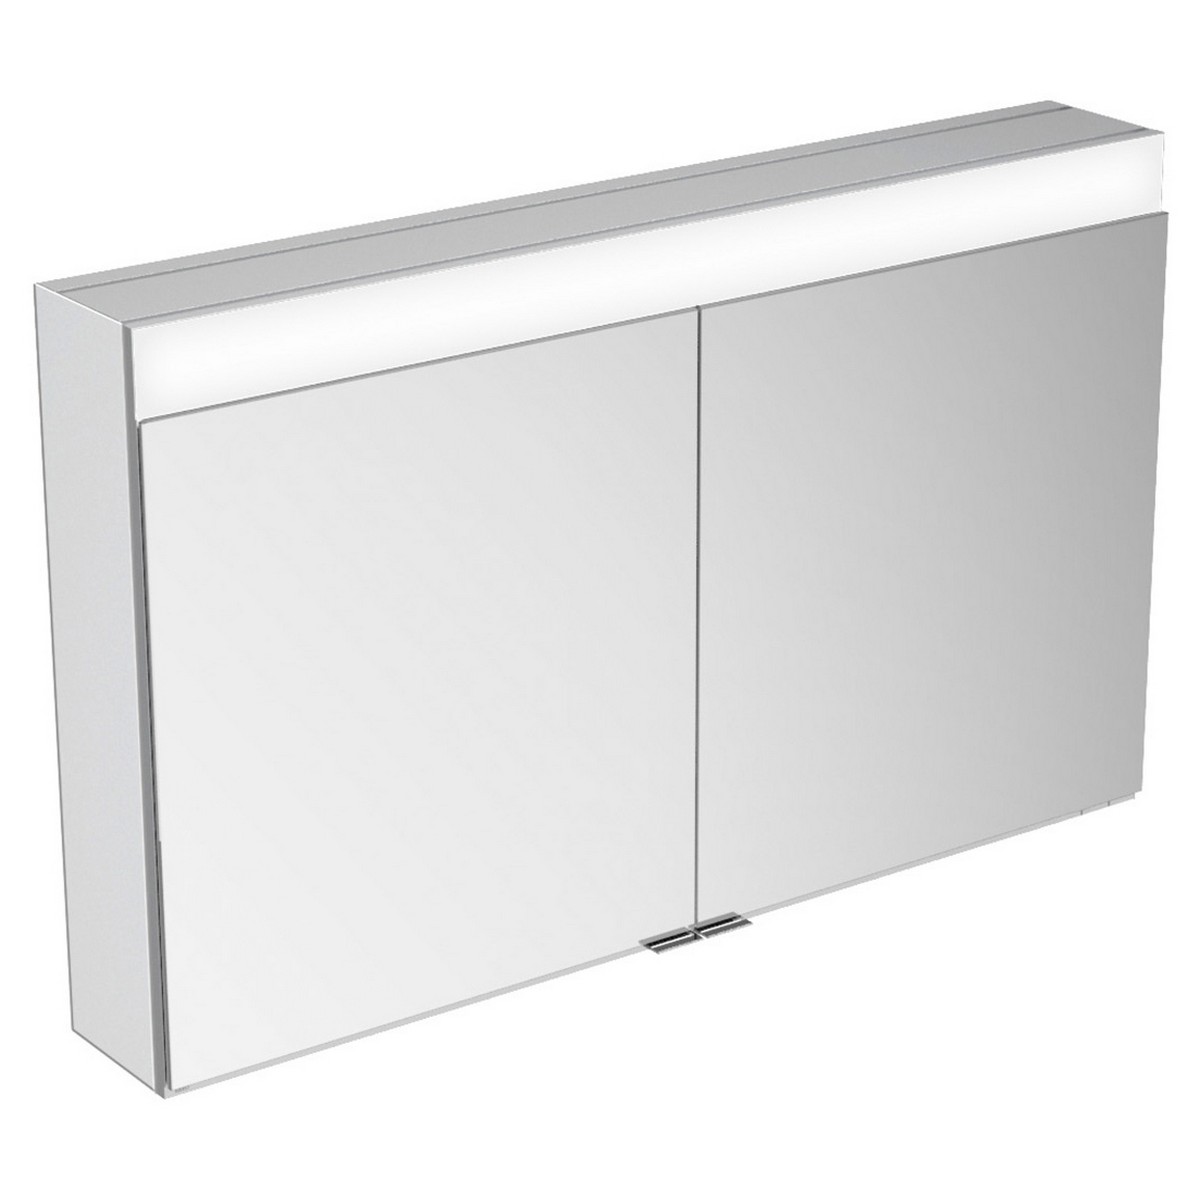 KEUCO 21532171351 EDITION 400 41 3/4 W X 6 1/2 D X 25 5/8 H INCH 2-DOOR 4000K LED WALL MOUNTED MIRROR MEDICINE CABINET IN ALUMINUM